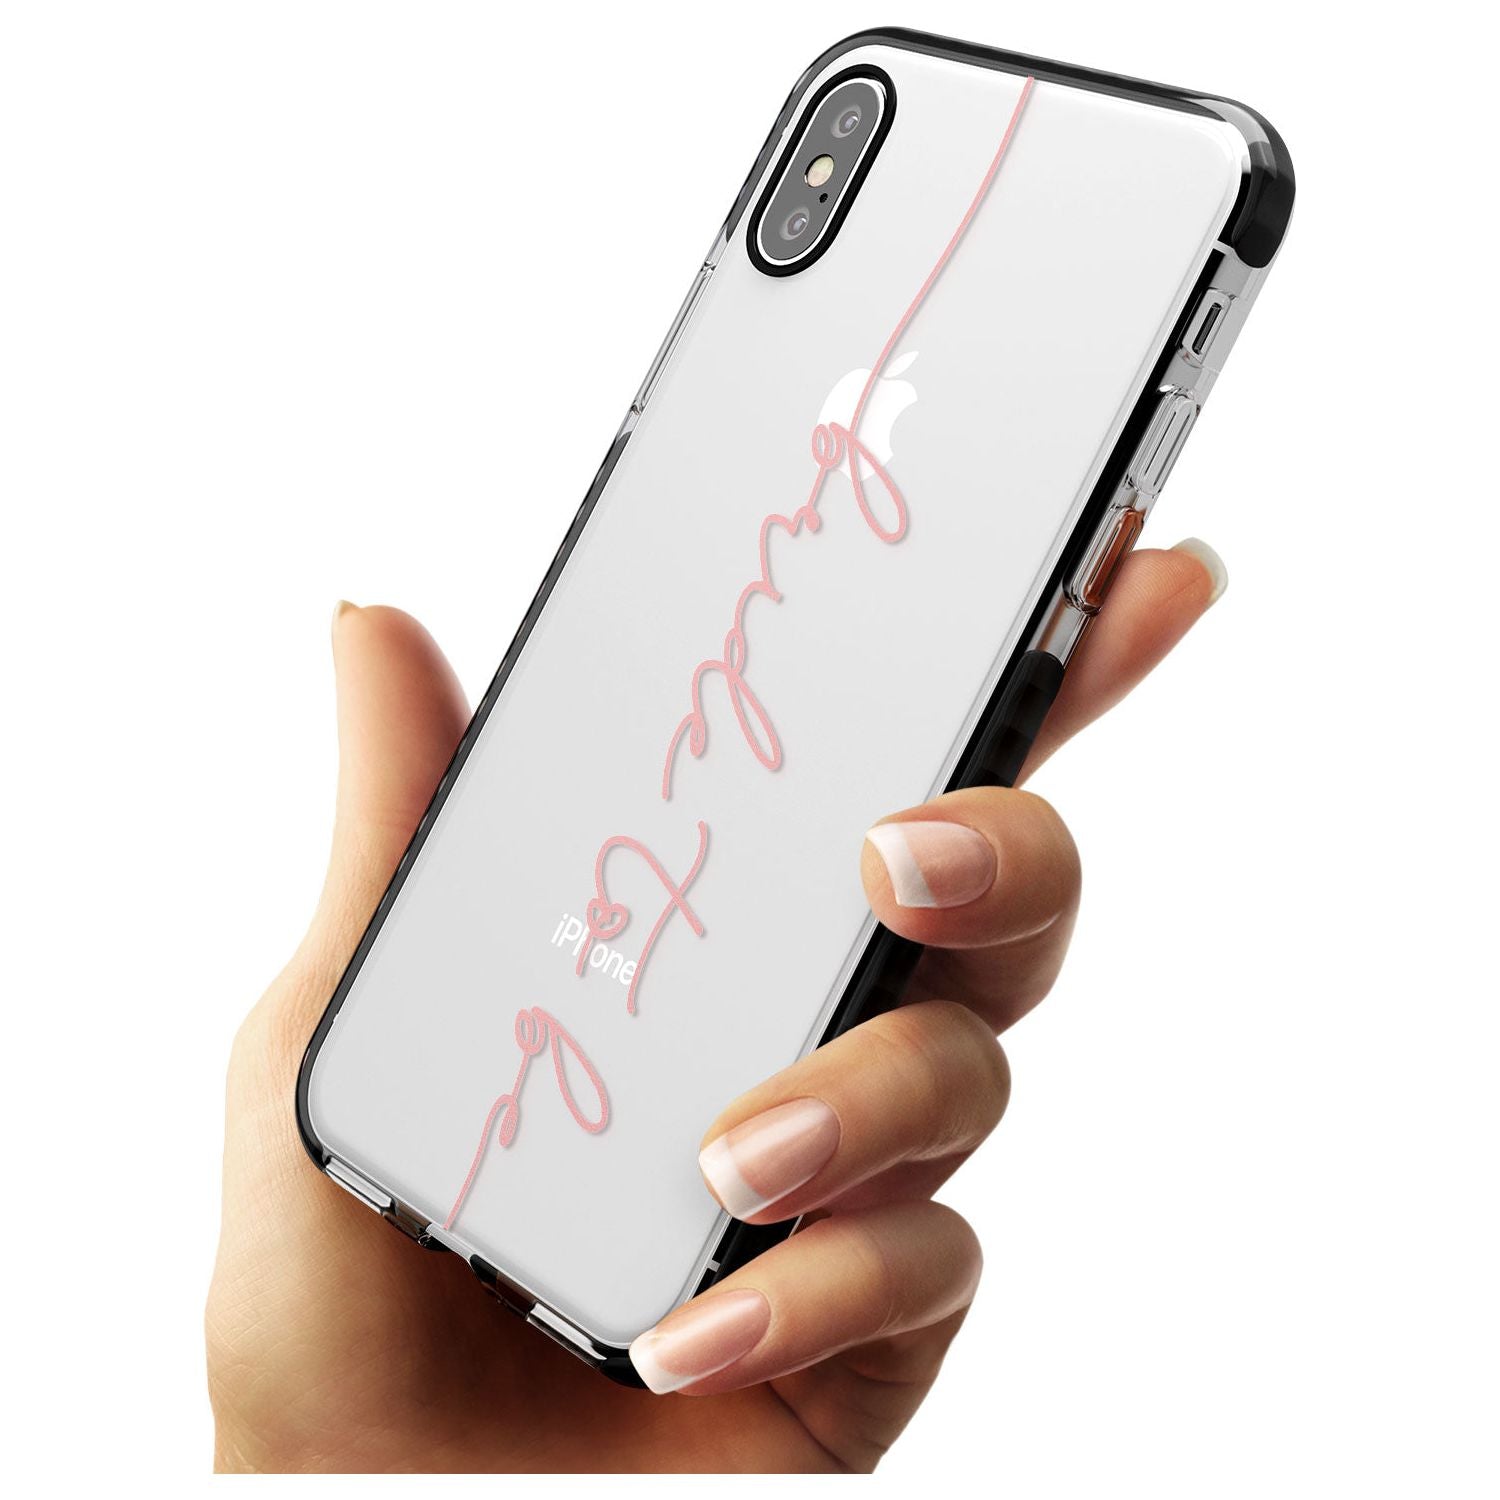 Bride to Be - Transparent Wedding Design Black Impact Phone Case for iPhone X XS Max XR